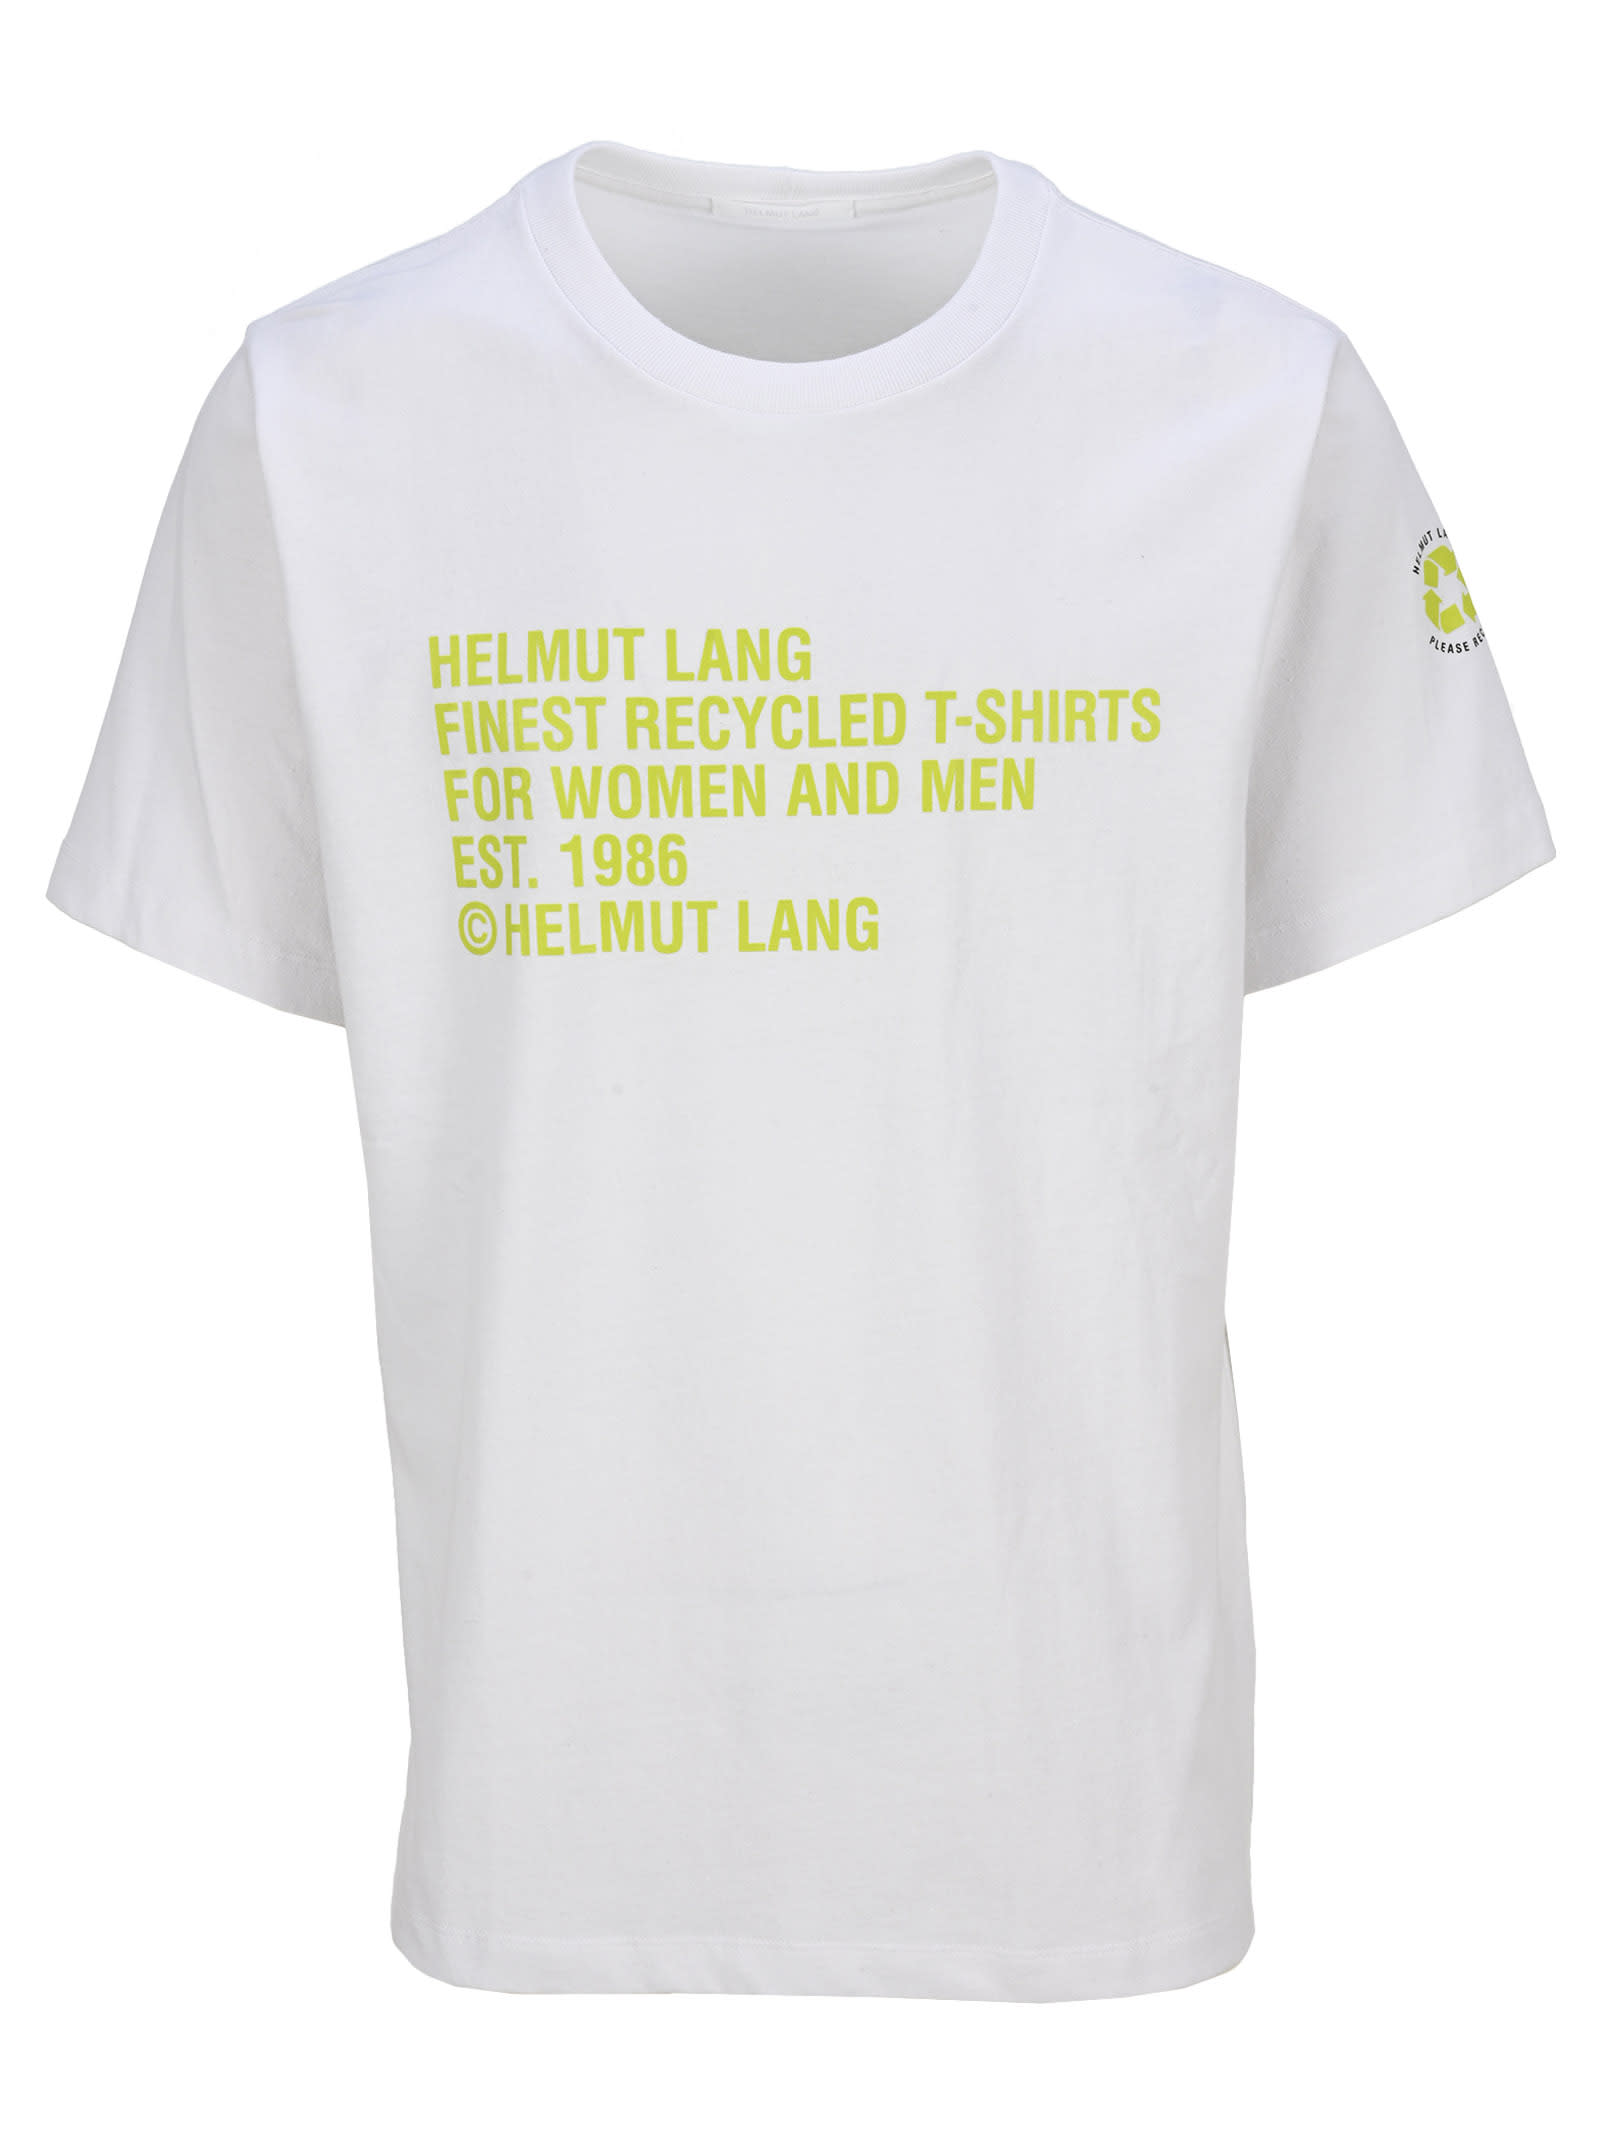 Helmut Lang Recycled T-shirt